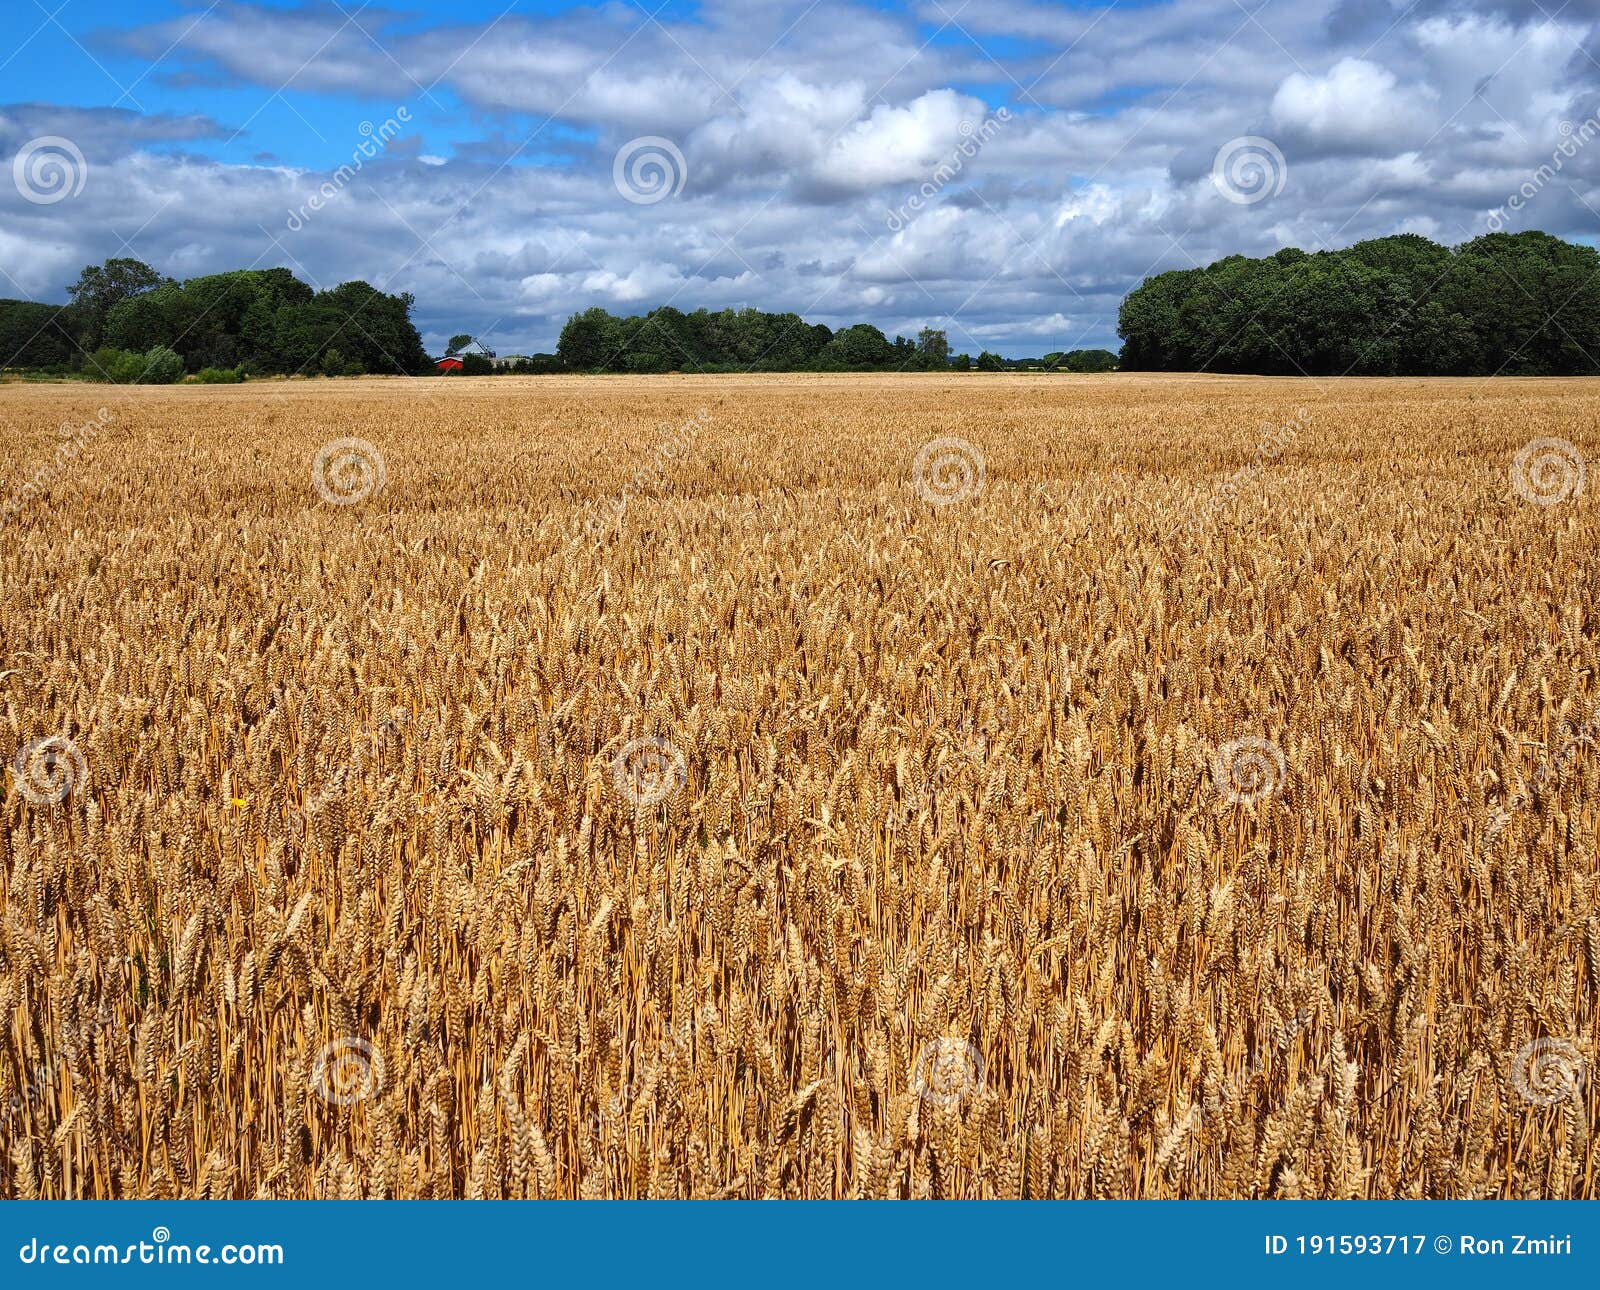 ripe golden wheat in a field just before the harvest